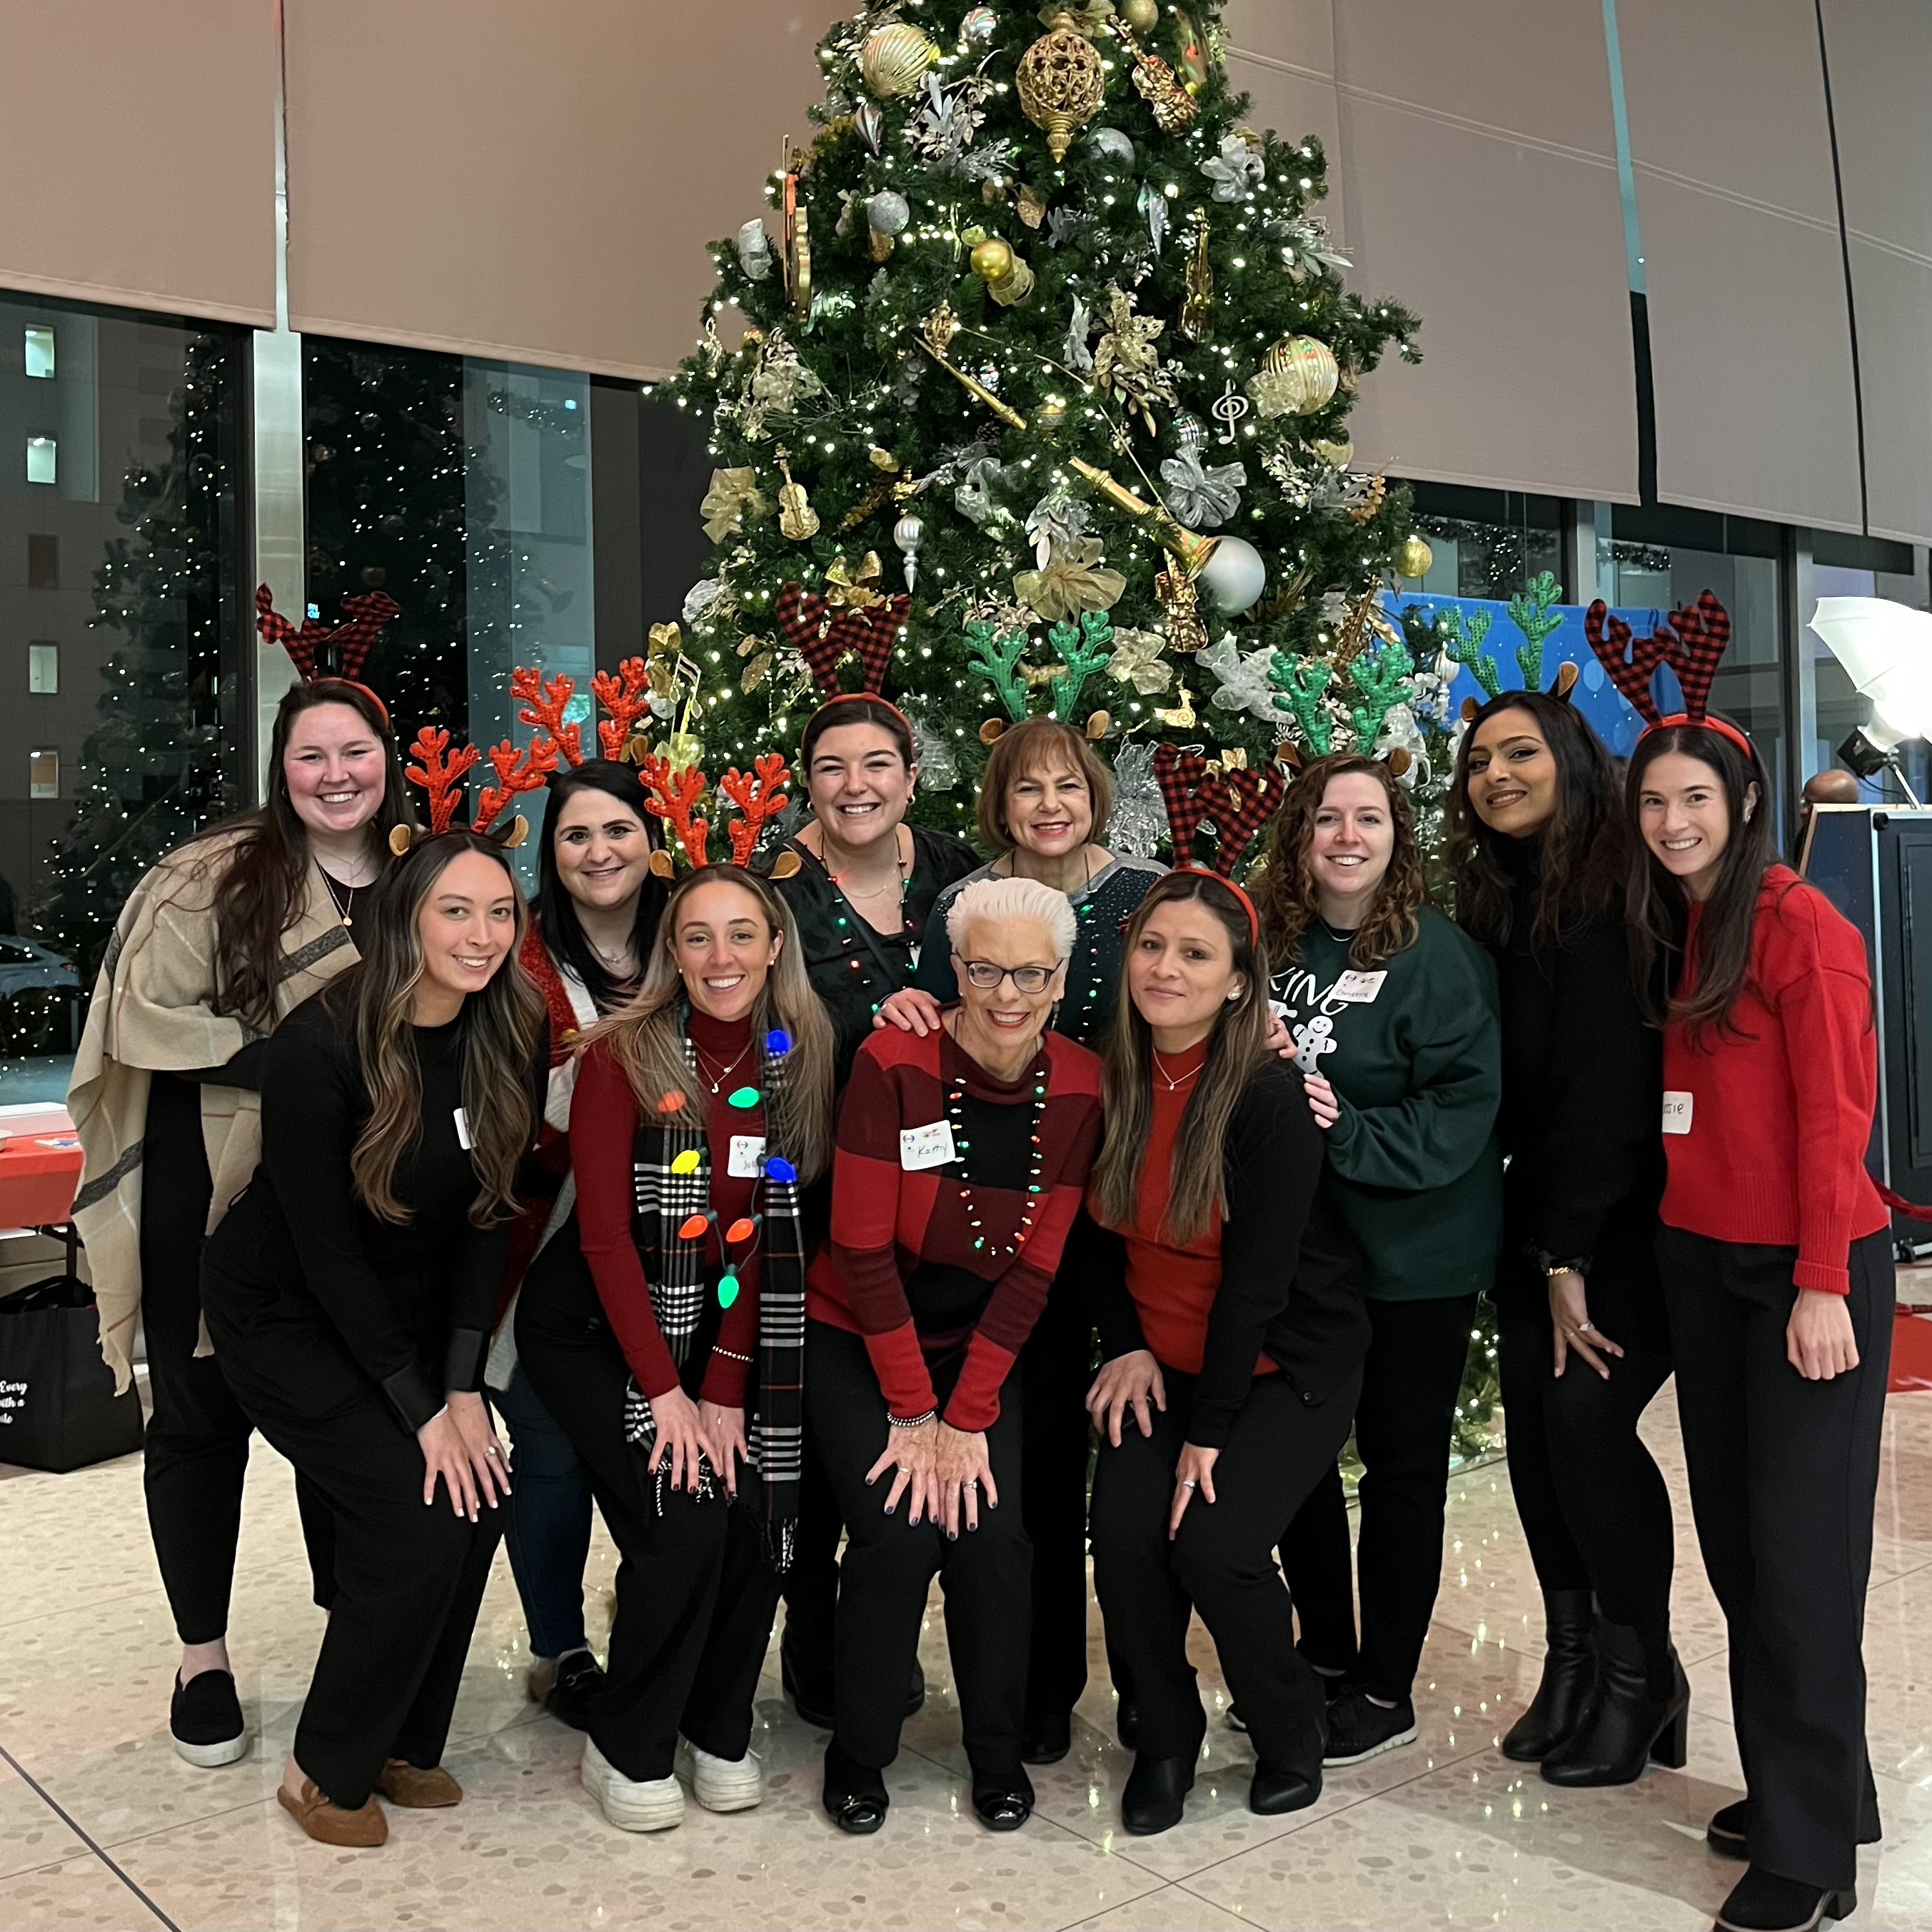 CancerCare staff standing in front of Christmas tree